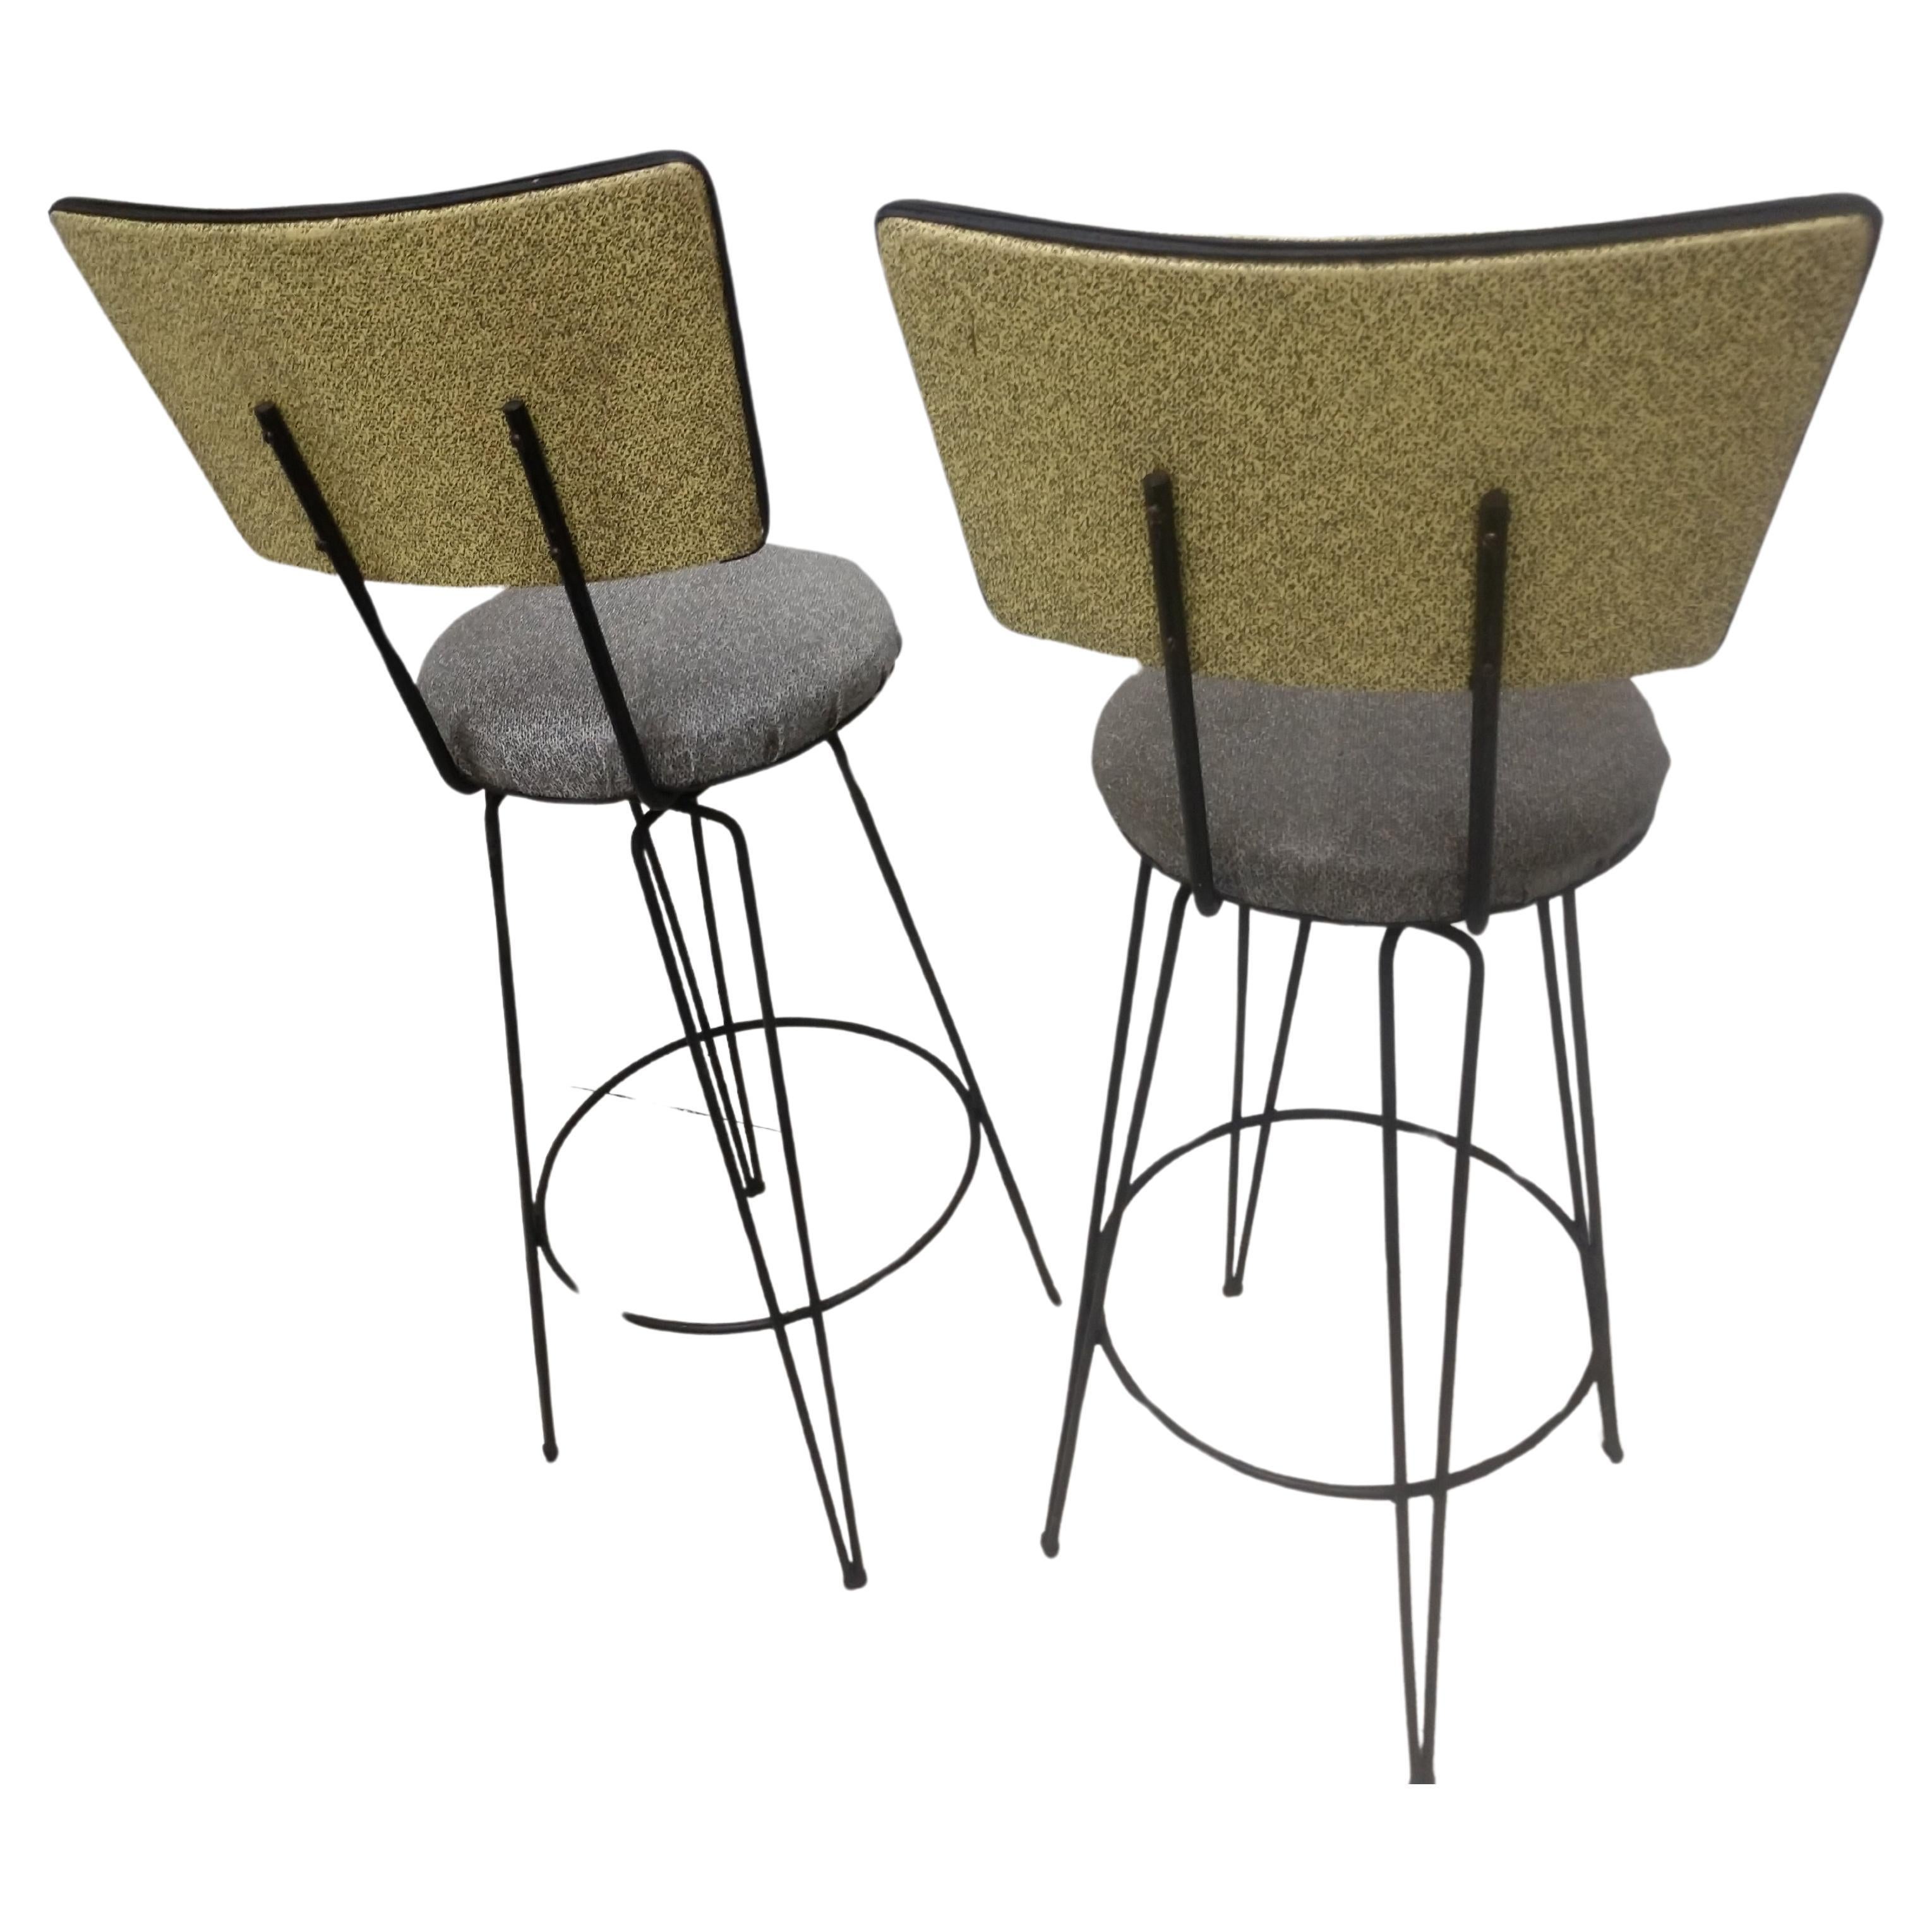 Fabulous 1950s stools with original vinyl fabric, two tone yellow with grey. Have a third which does not have with original foot glides as the pair mentioned. Seat height is 31.5. They swivel freely and are very comfy with a place, bar for your